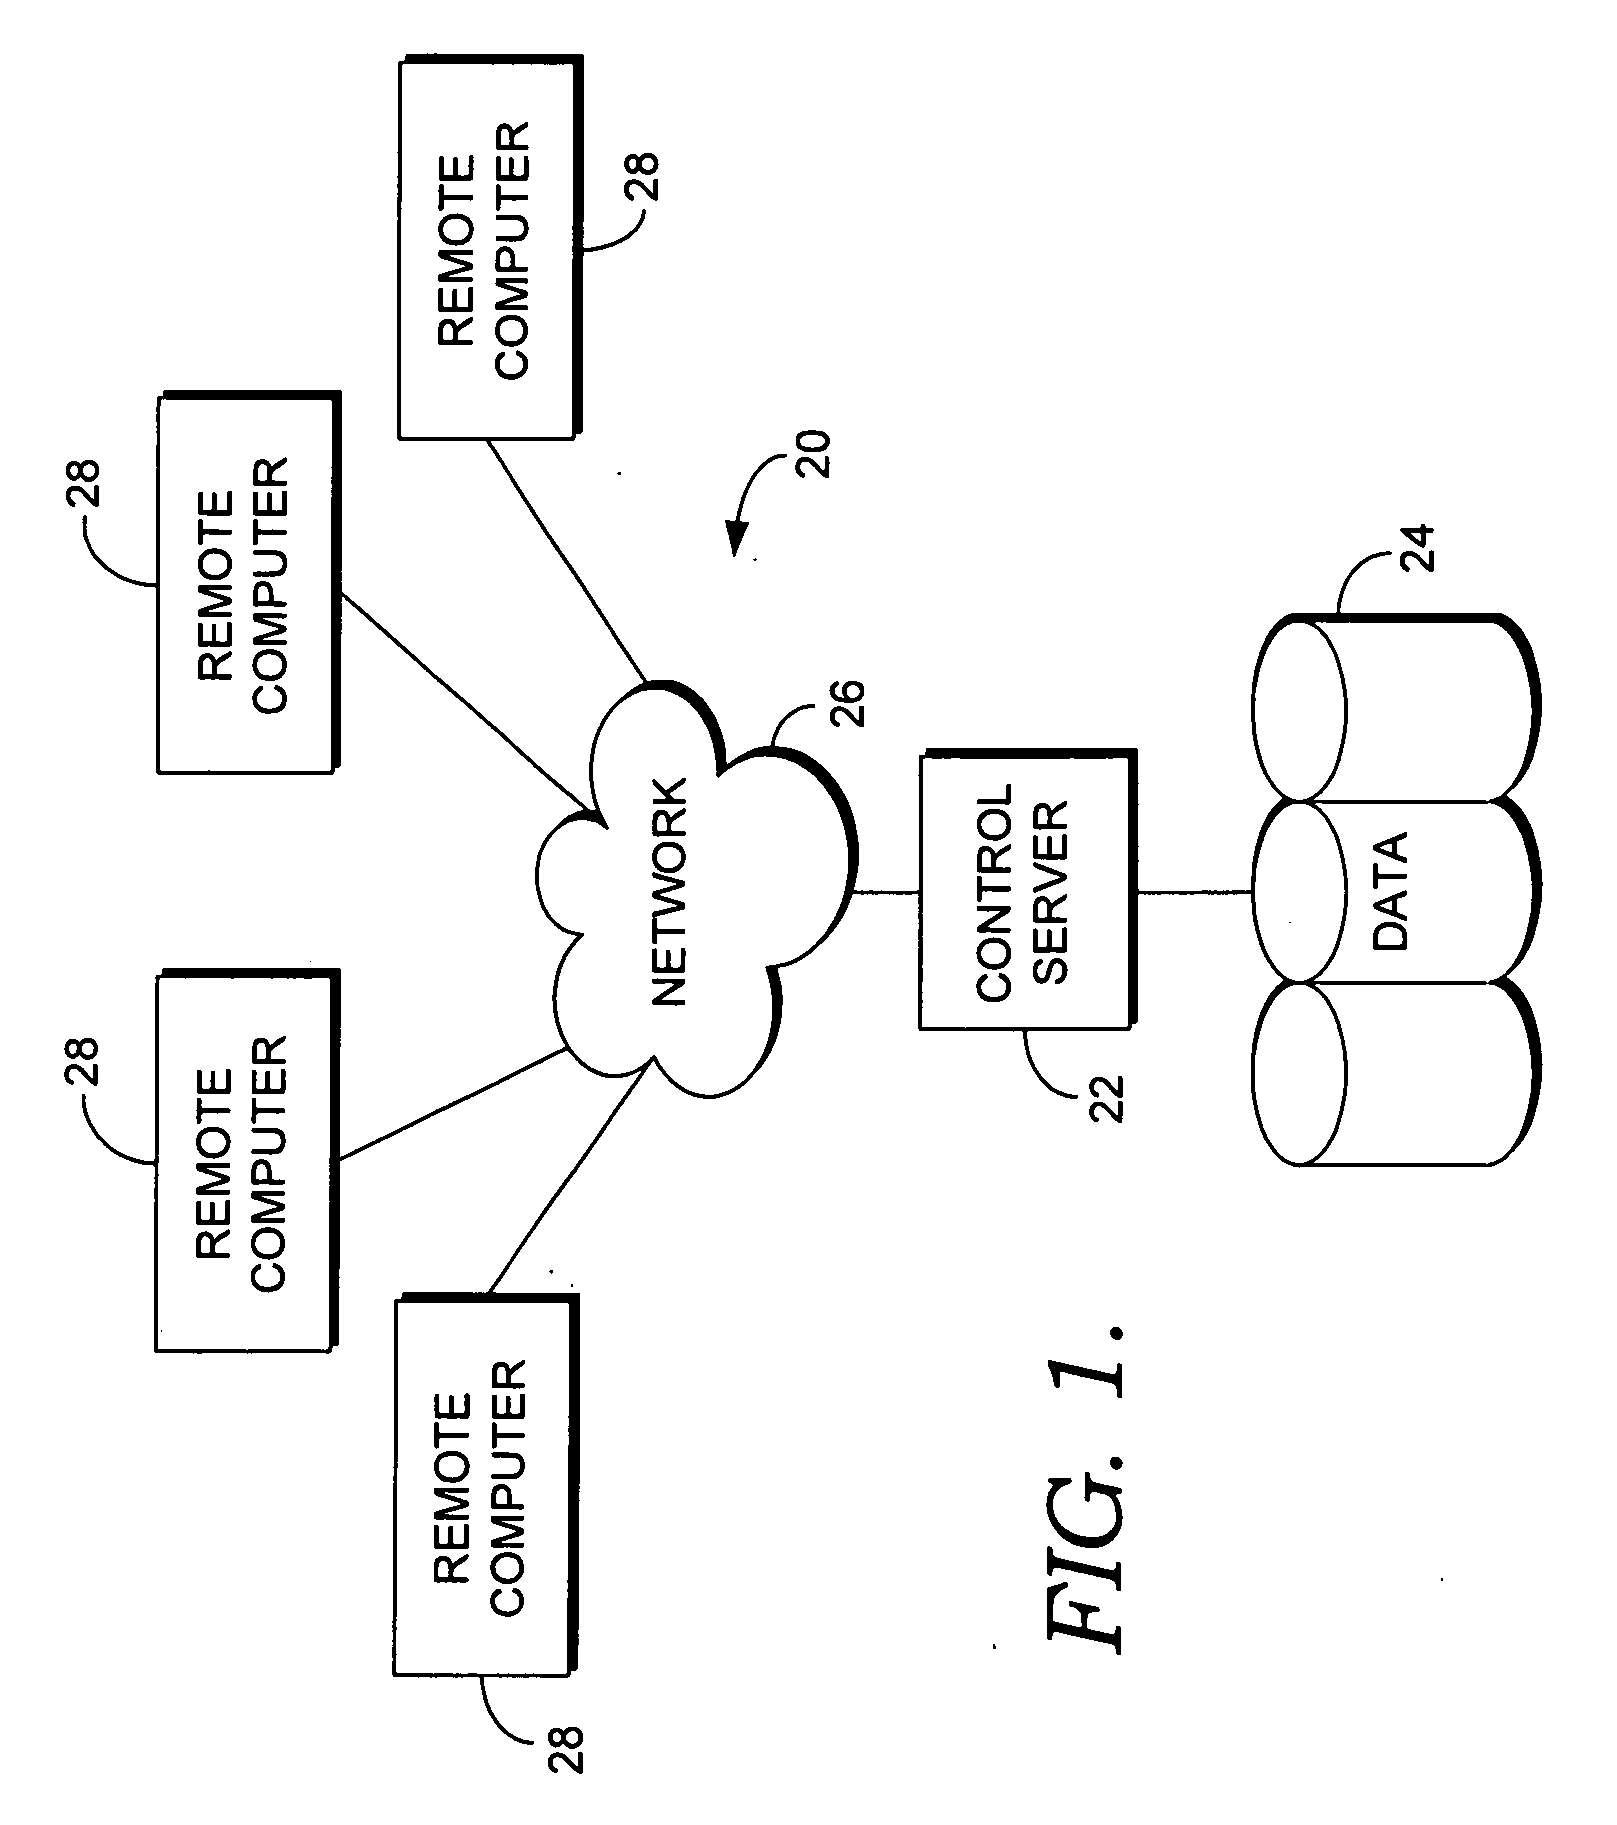 Backing up a protocol order associated with genetic testing